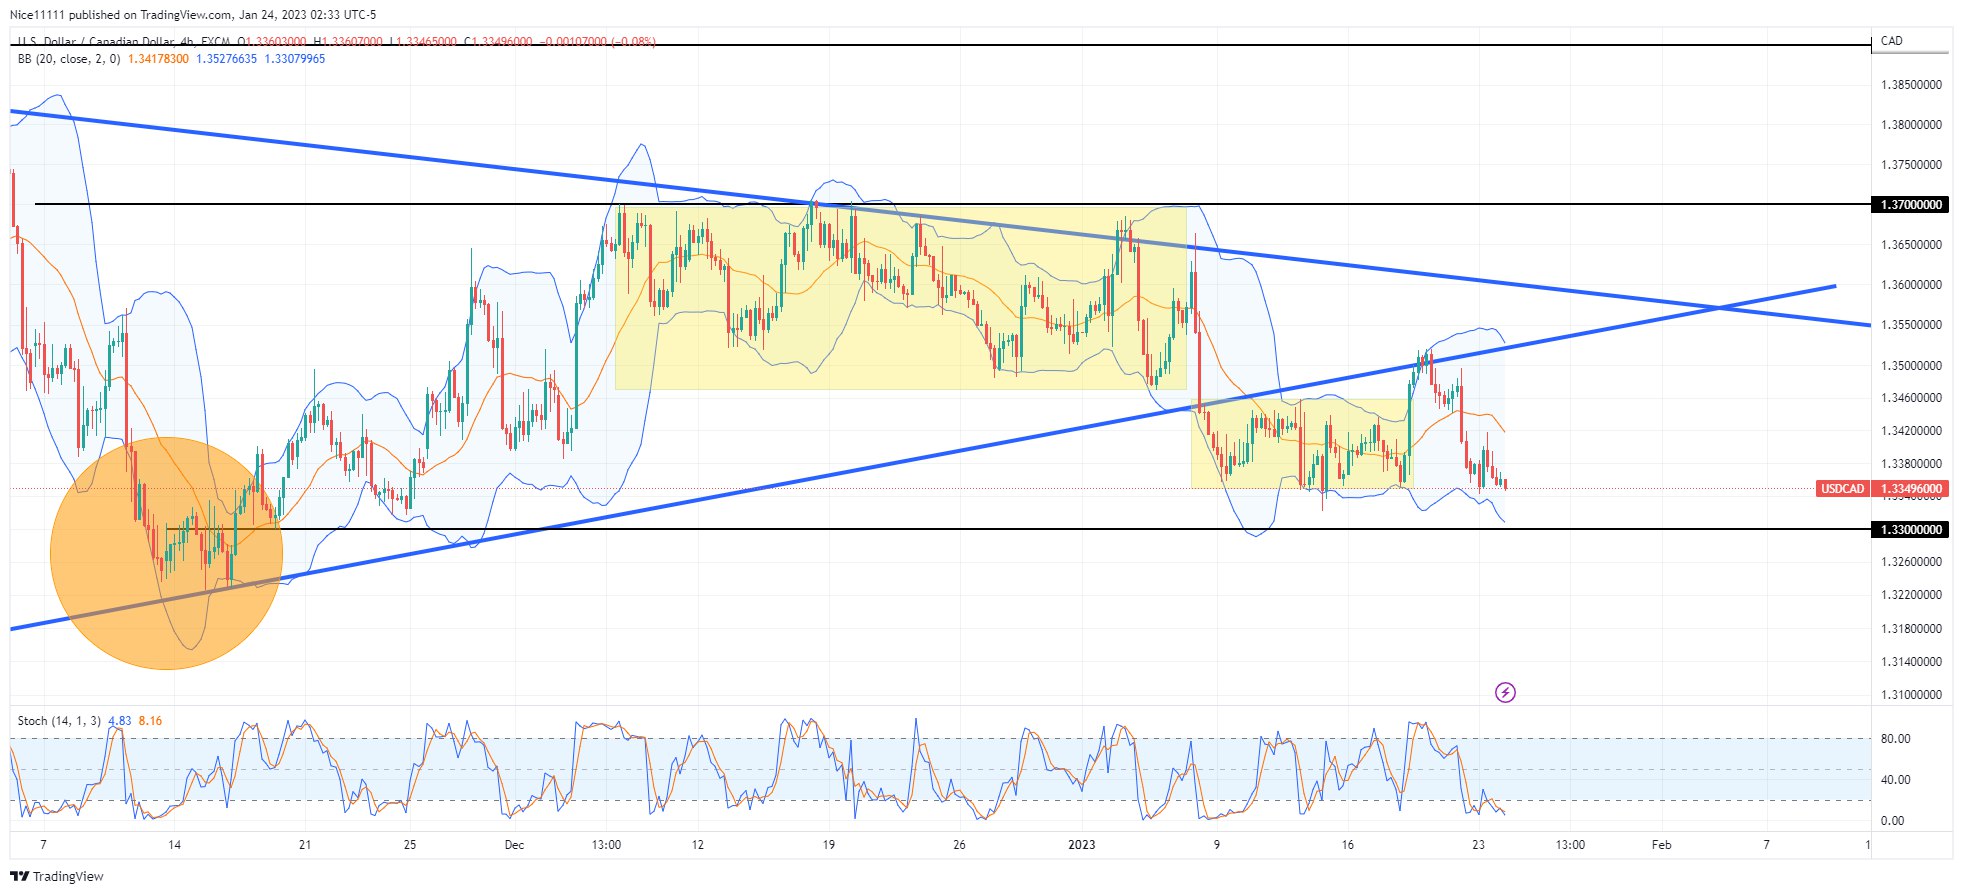 The USDCAD Bearish Break and Retest Is Successful